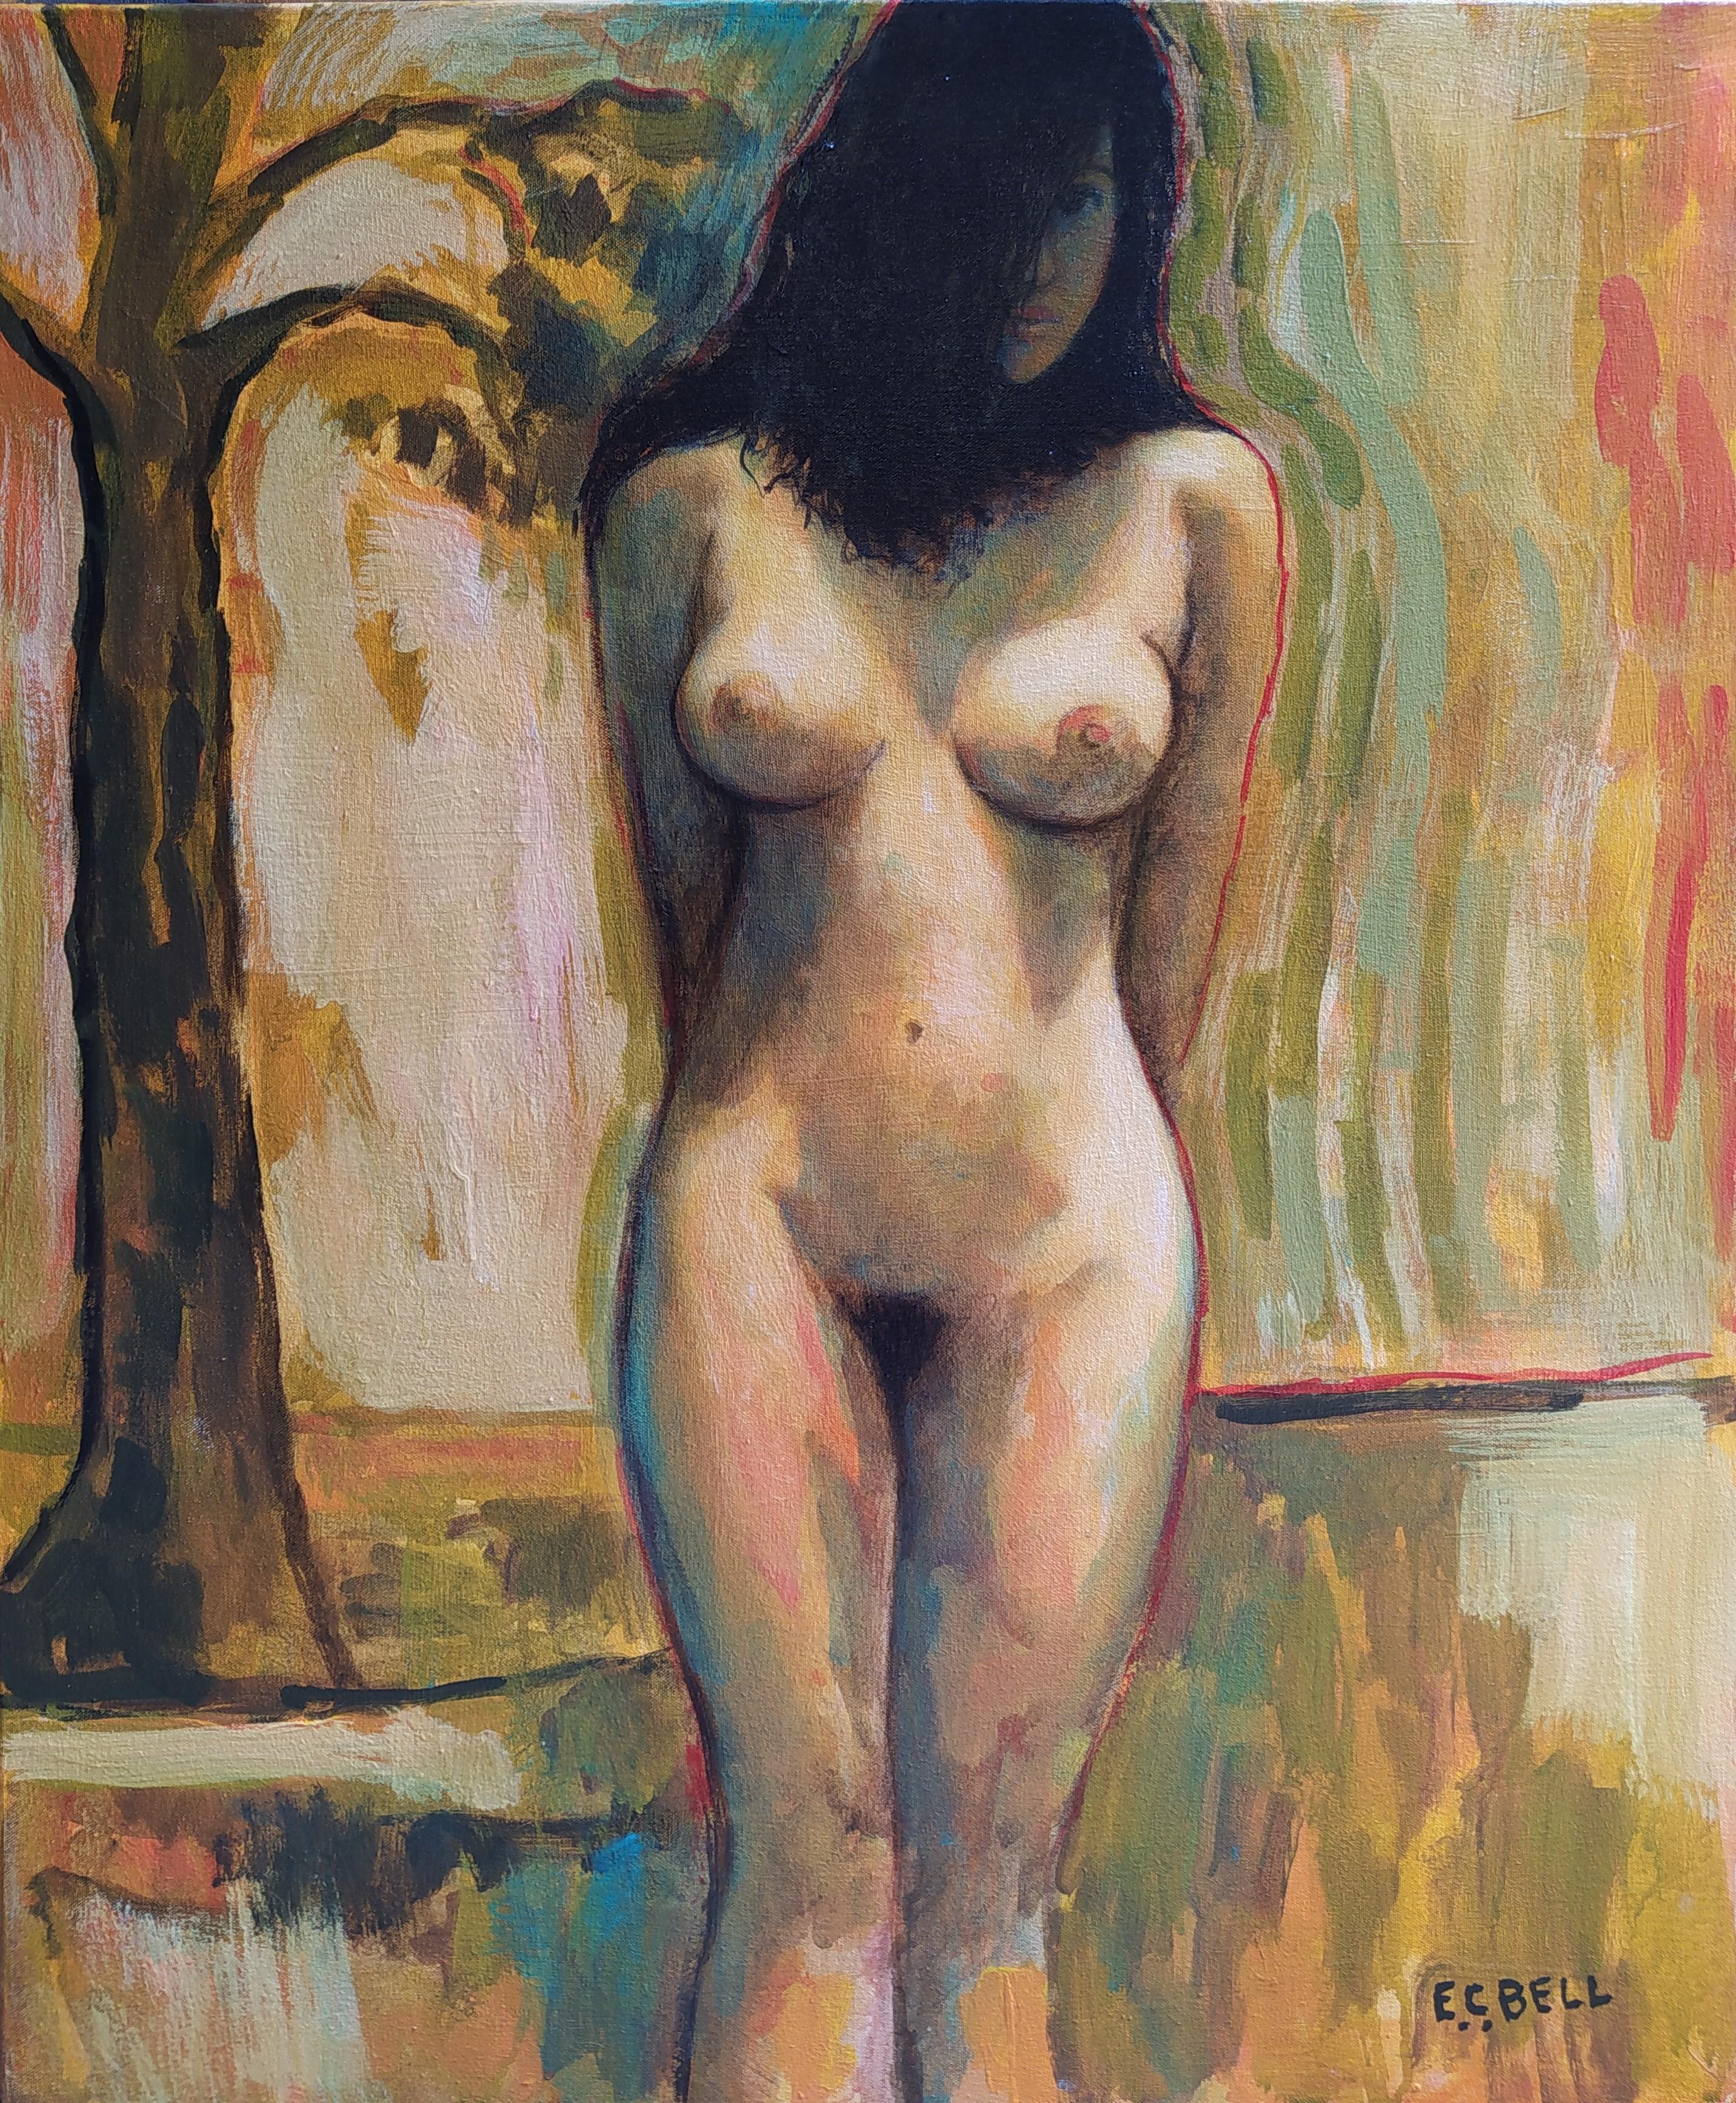 E.C. Bell Nude Painting - "Sussy" - Vertical expressionist female nude with tree in pale colors.